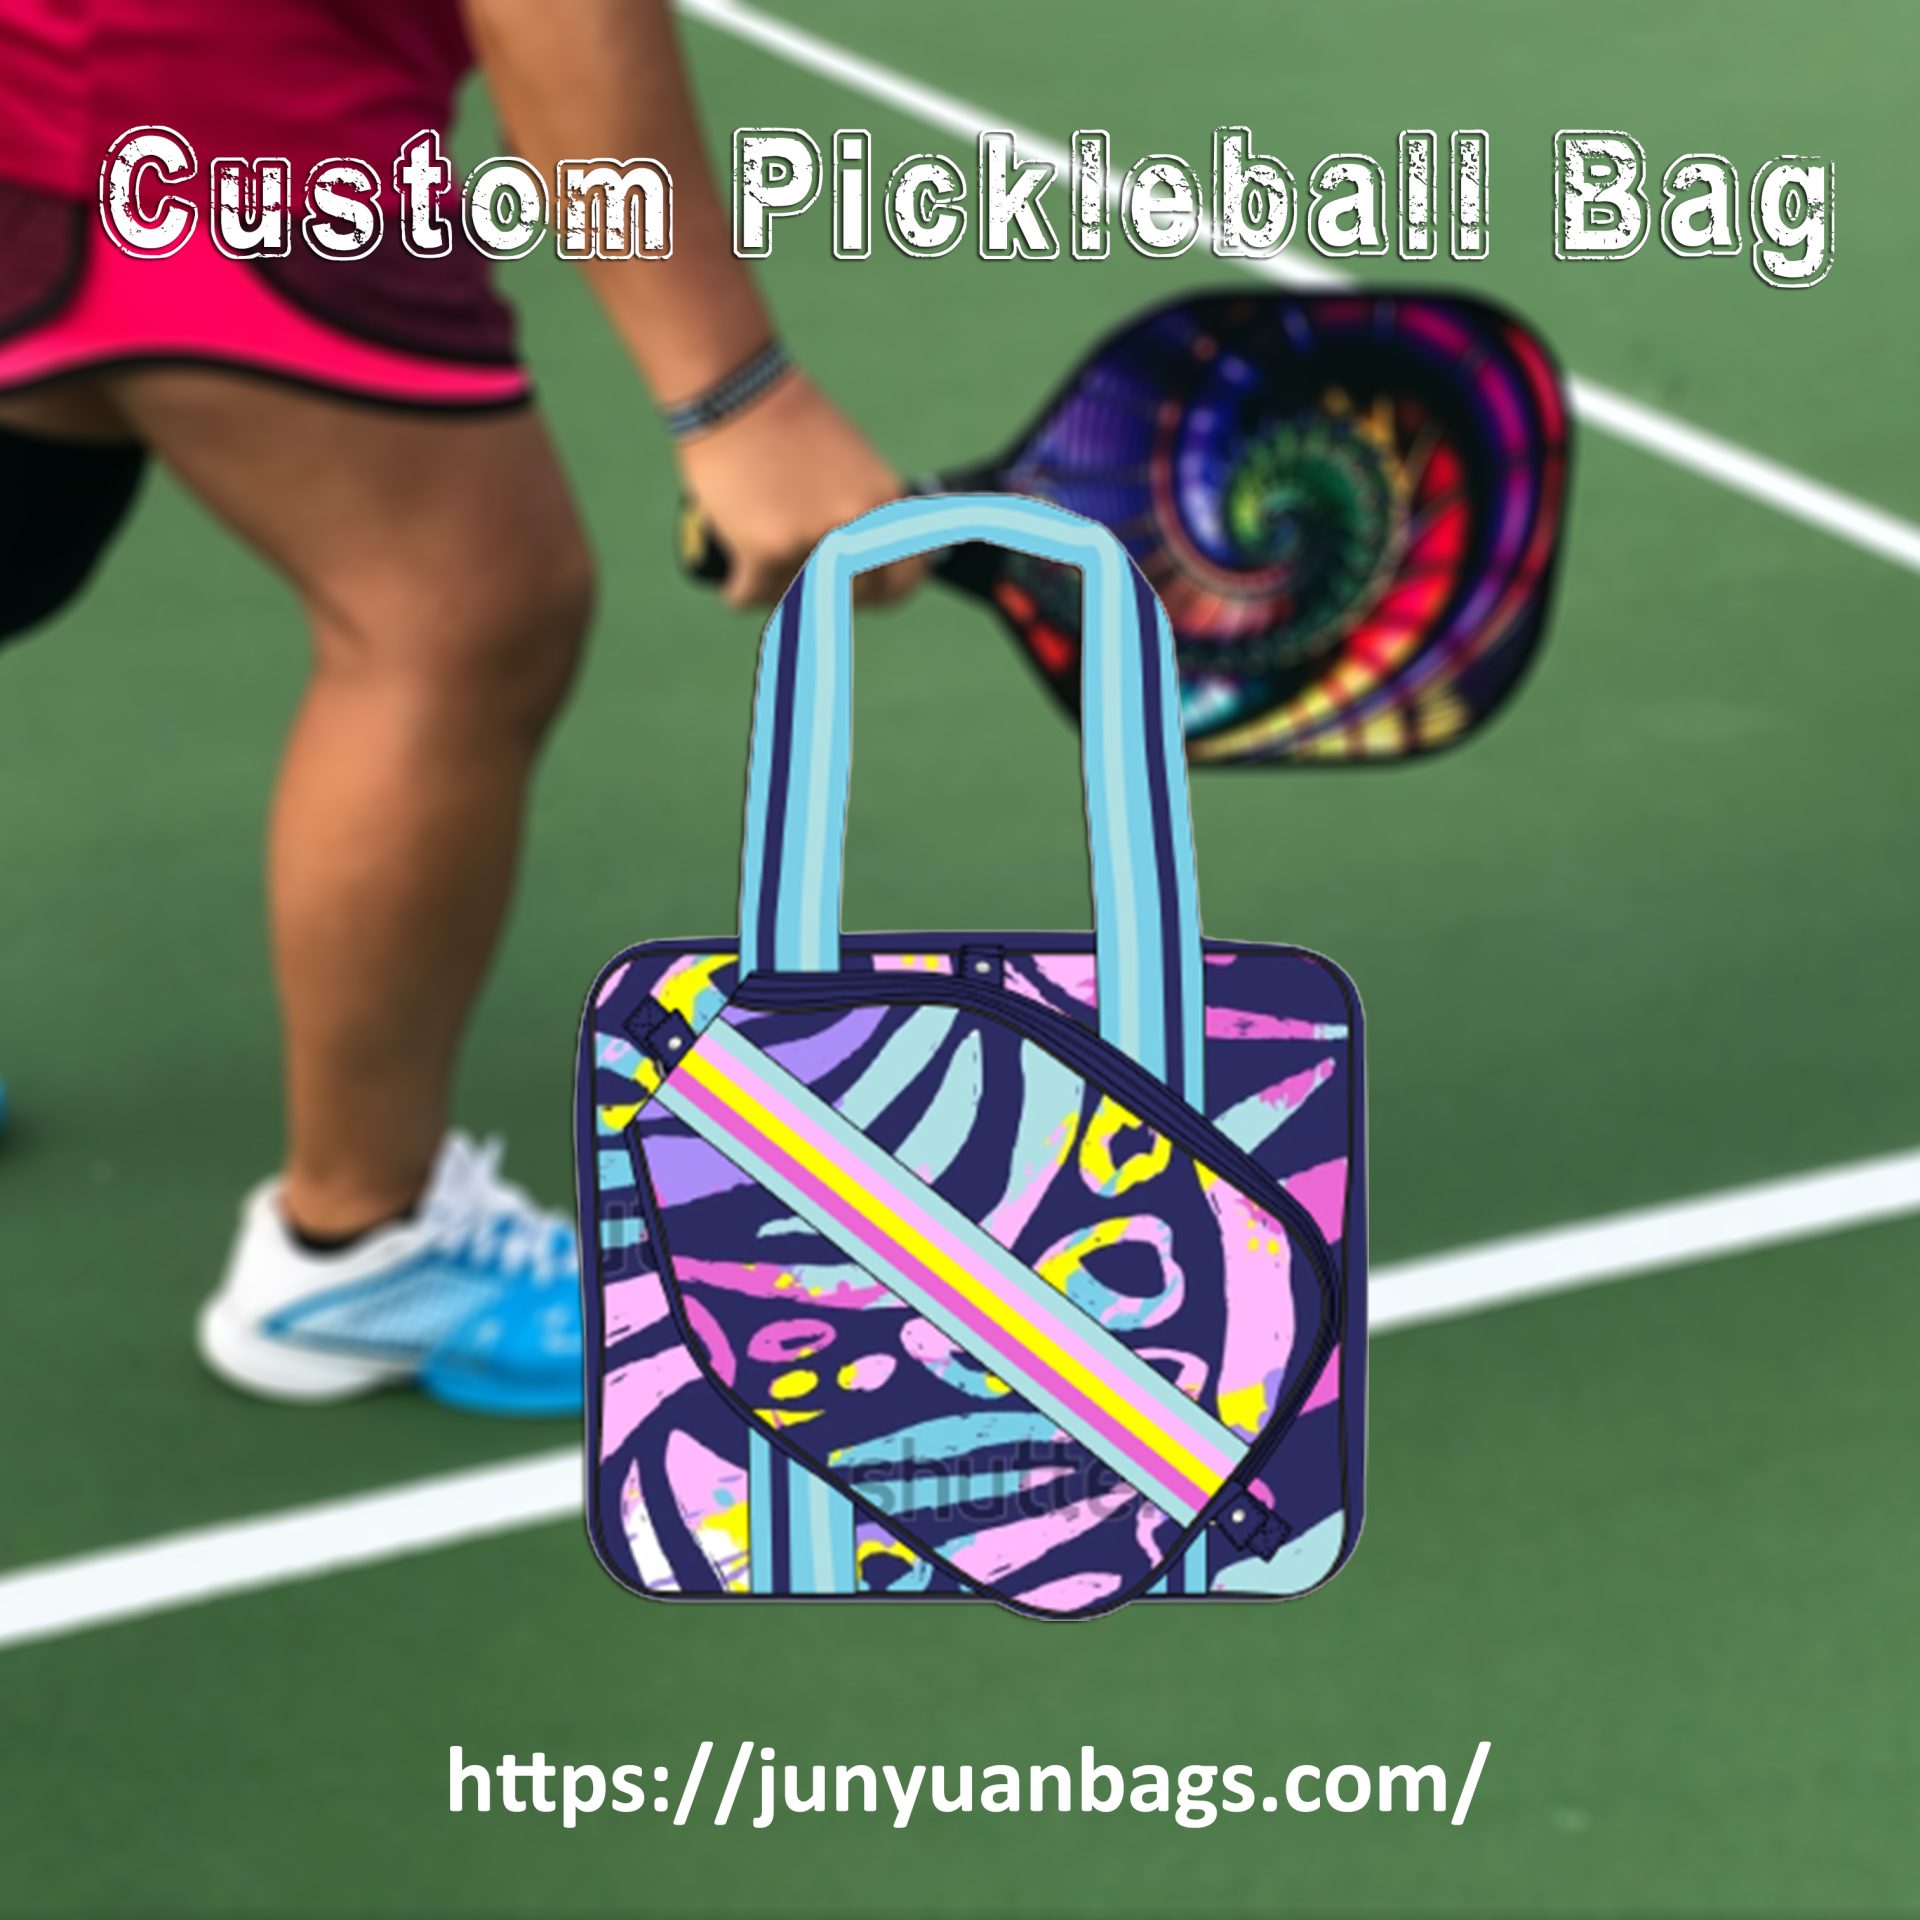 personalized pickleball bags